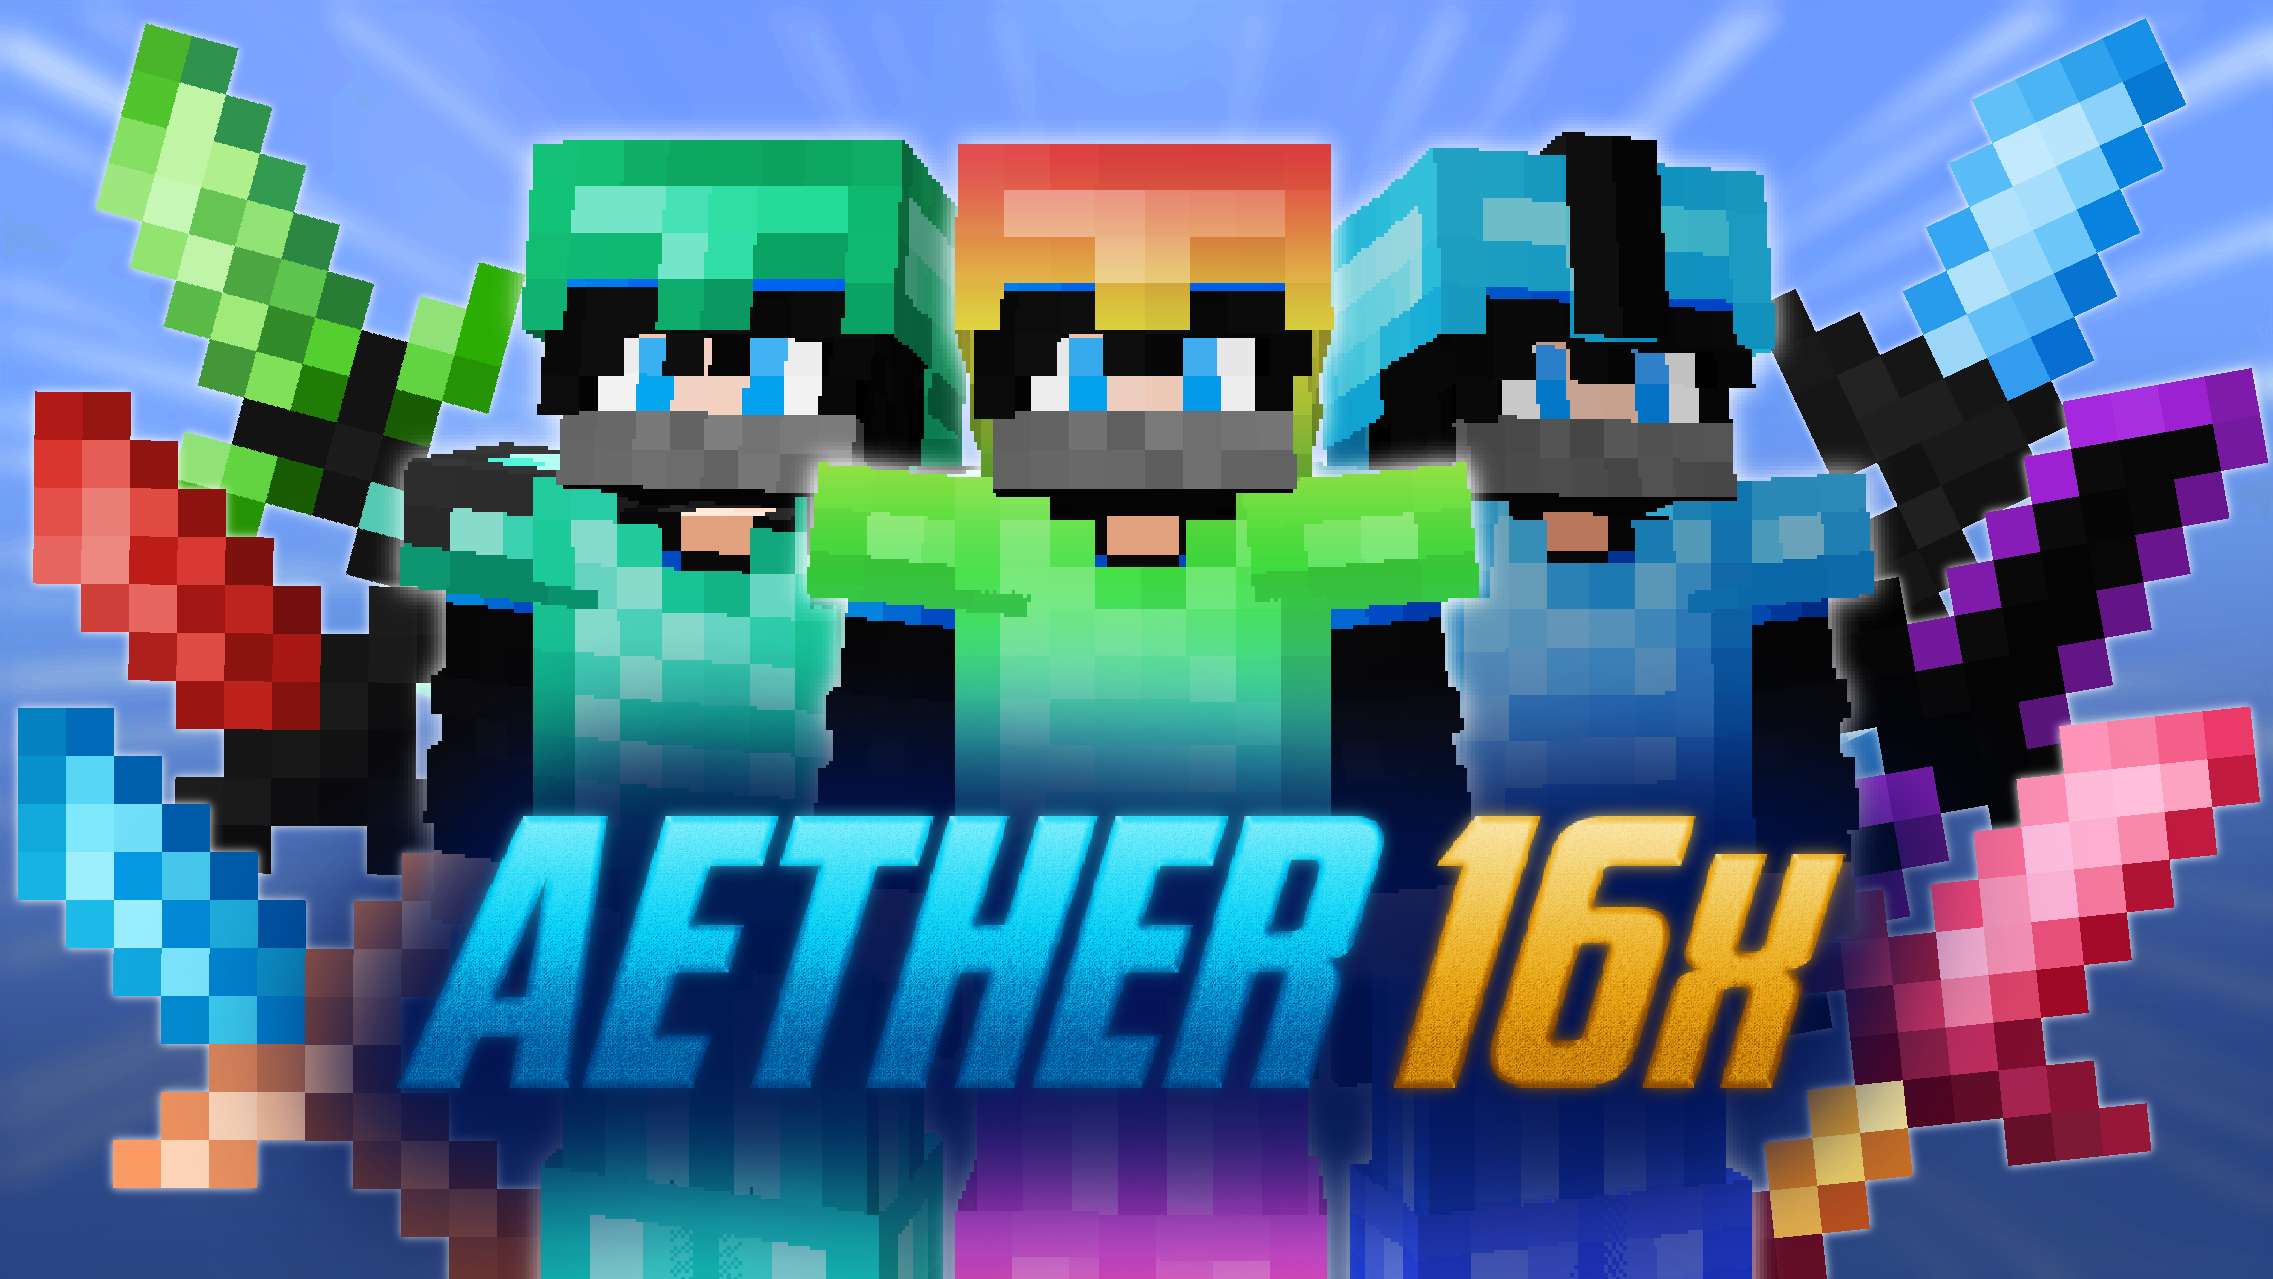 Aether 16x [cchloe] 16x by Mqryo on PvPRP